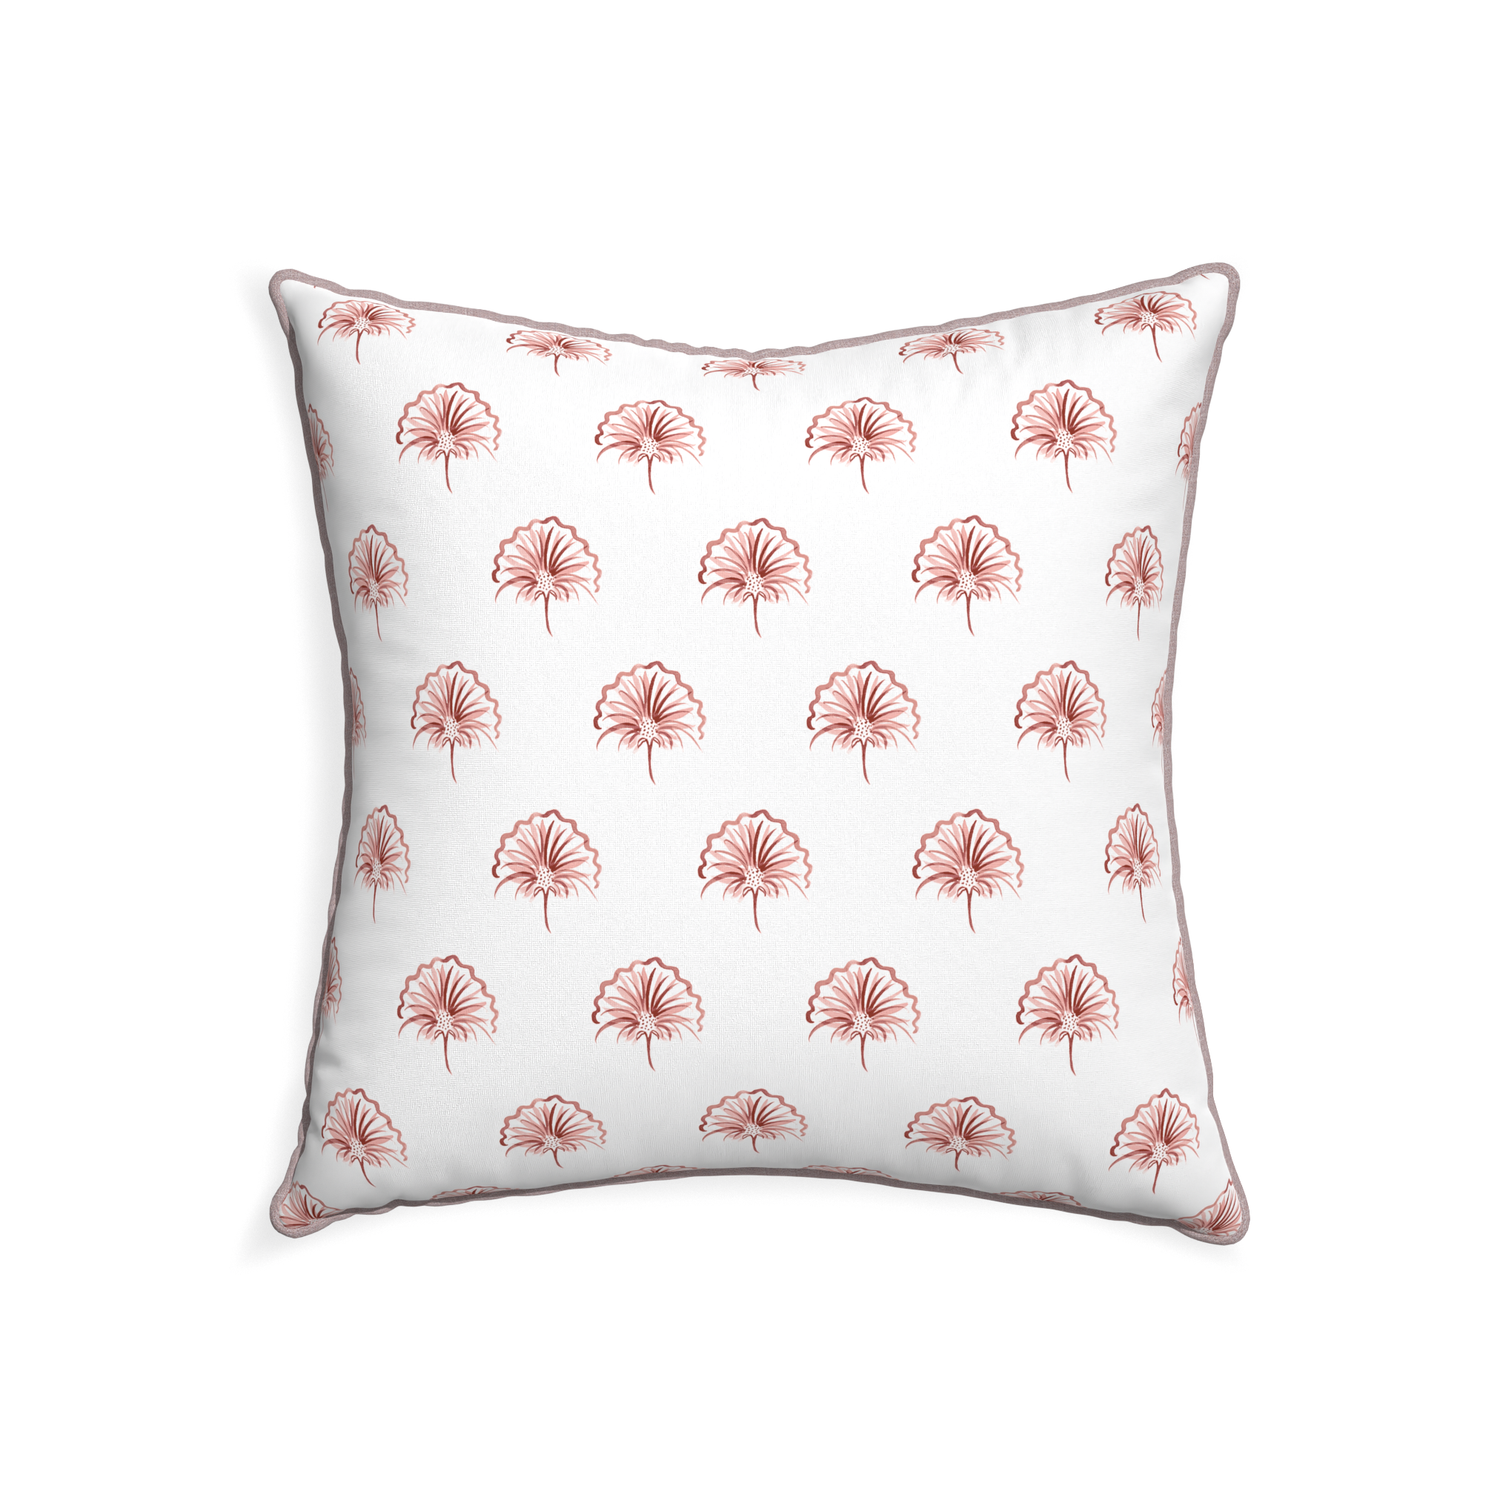 22-square penelope rose custom floral pinkpillow with orchid piping on white background